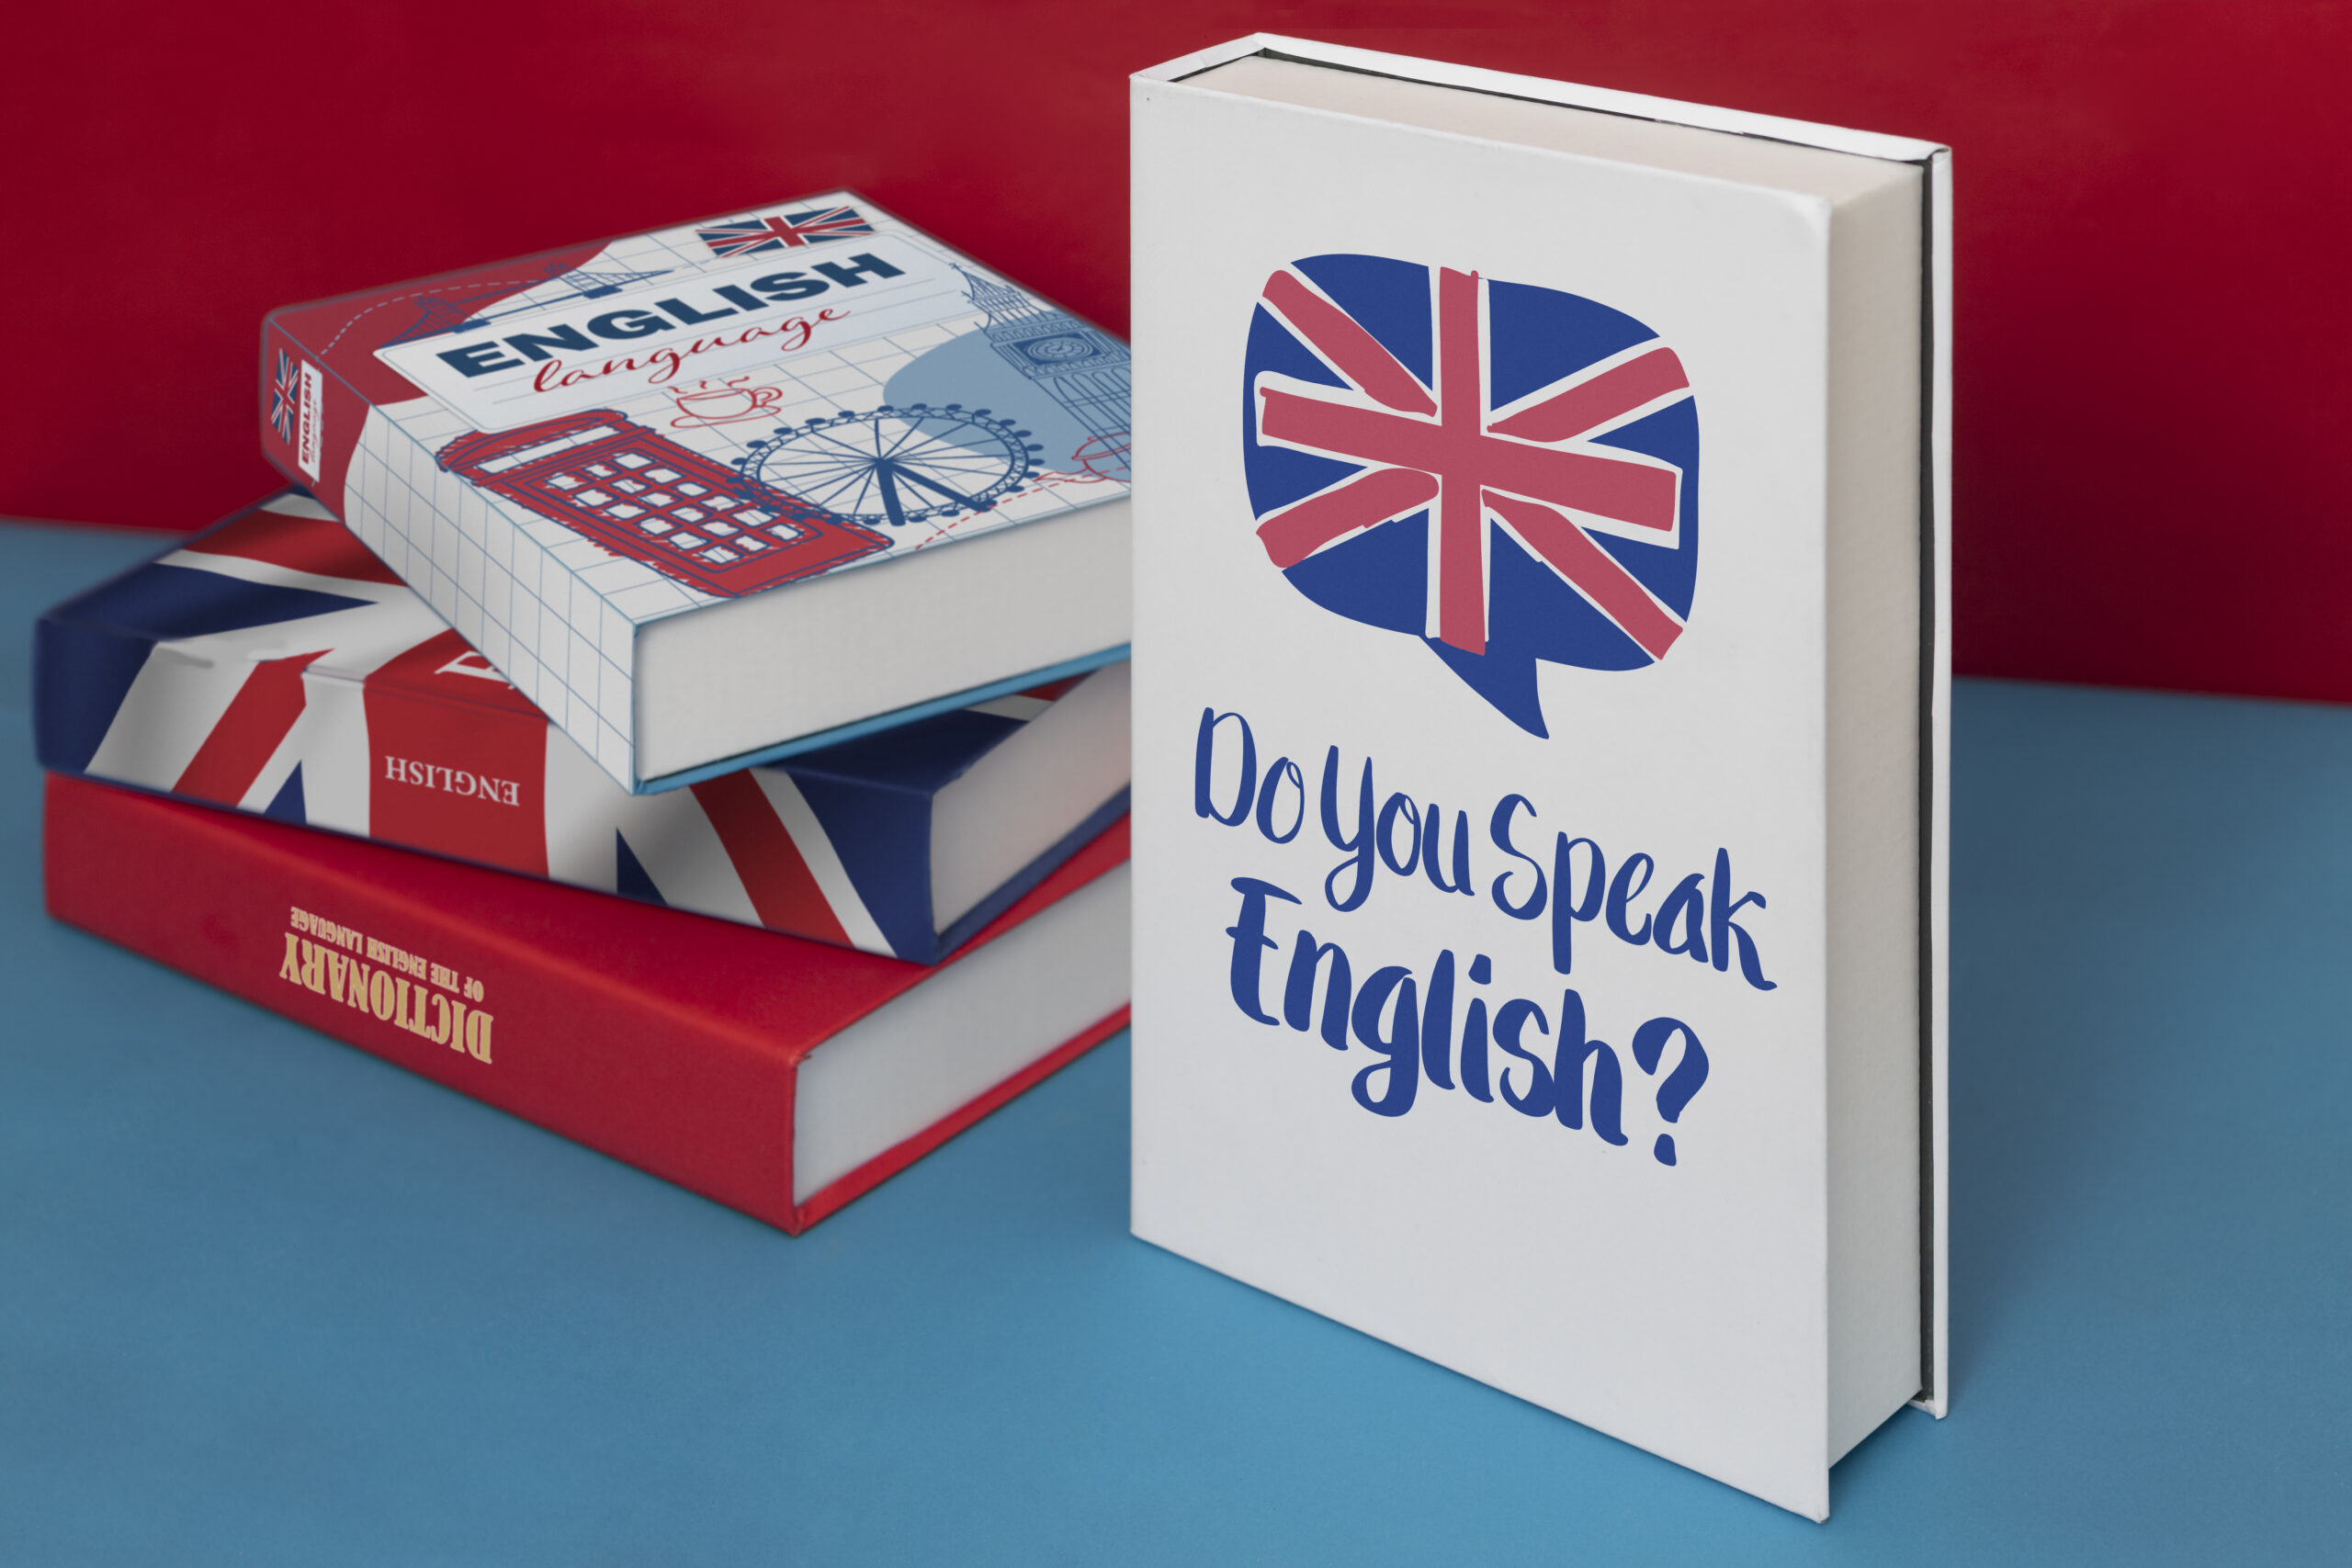 Guide to know what is my English level. Guia para saber cual es mi nivel de ingles